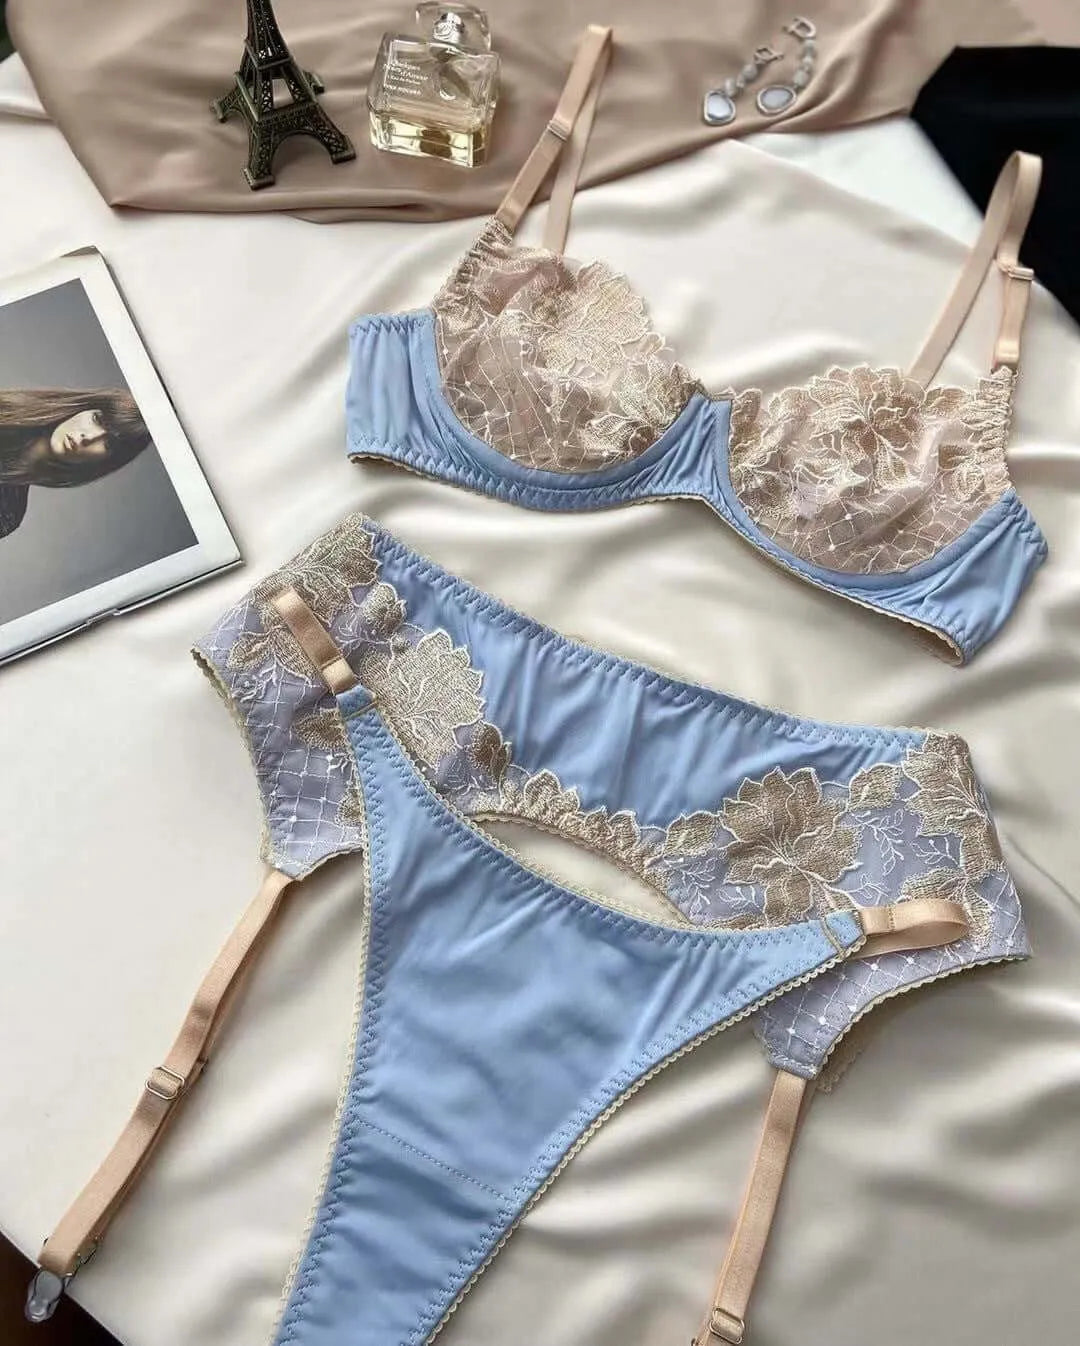 Classic Beauty in a Vintage-inspired Blue and Champagne Lace Lingerie Set